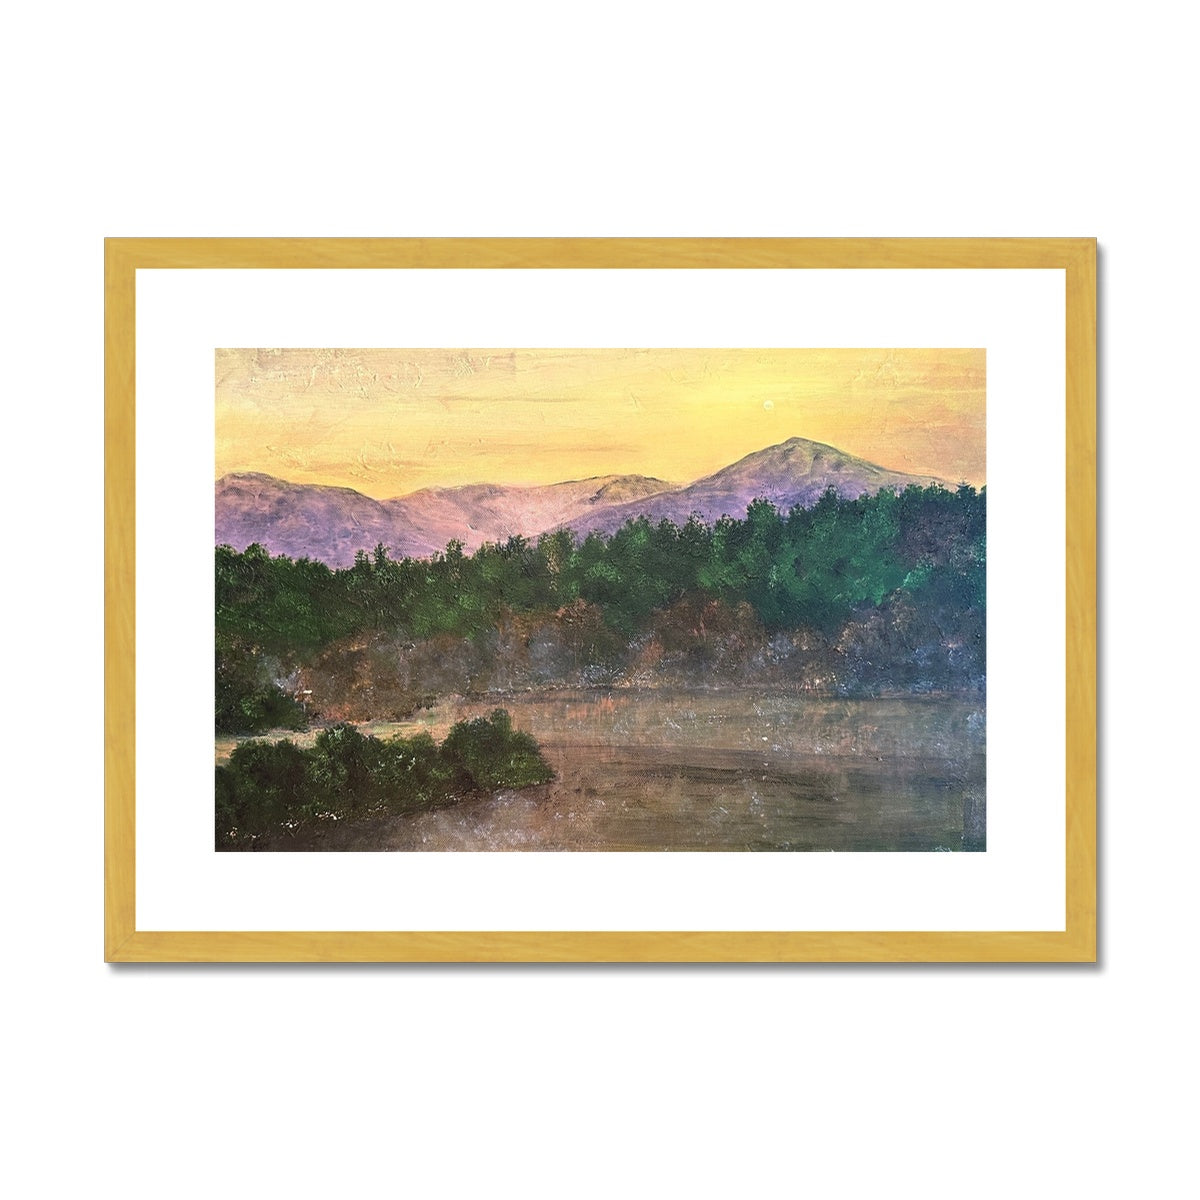 Ben Tee Invergarry Painting | Antique Framed & Mounted Prints From Scotland-Antique Framed & Mounted Prints-Scottish Lochs & Mountains Art Gallery-A2 Landscape-Gold Frame-Paintings, Prints, Homeware, Art Gifts From Scotland By Scottish Artist Kevin Hunter